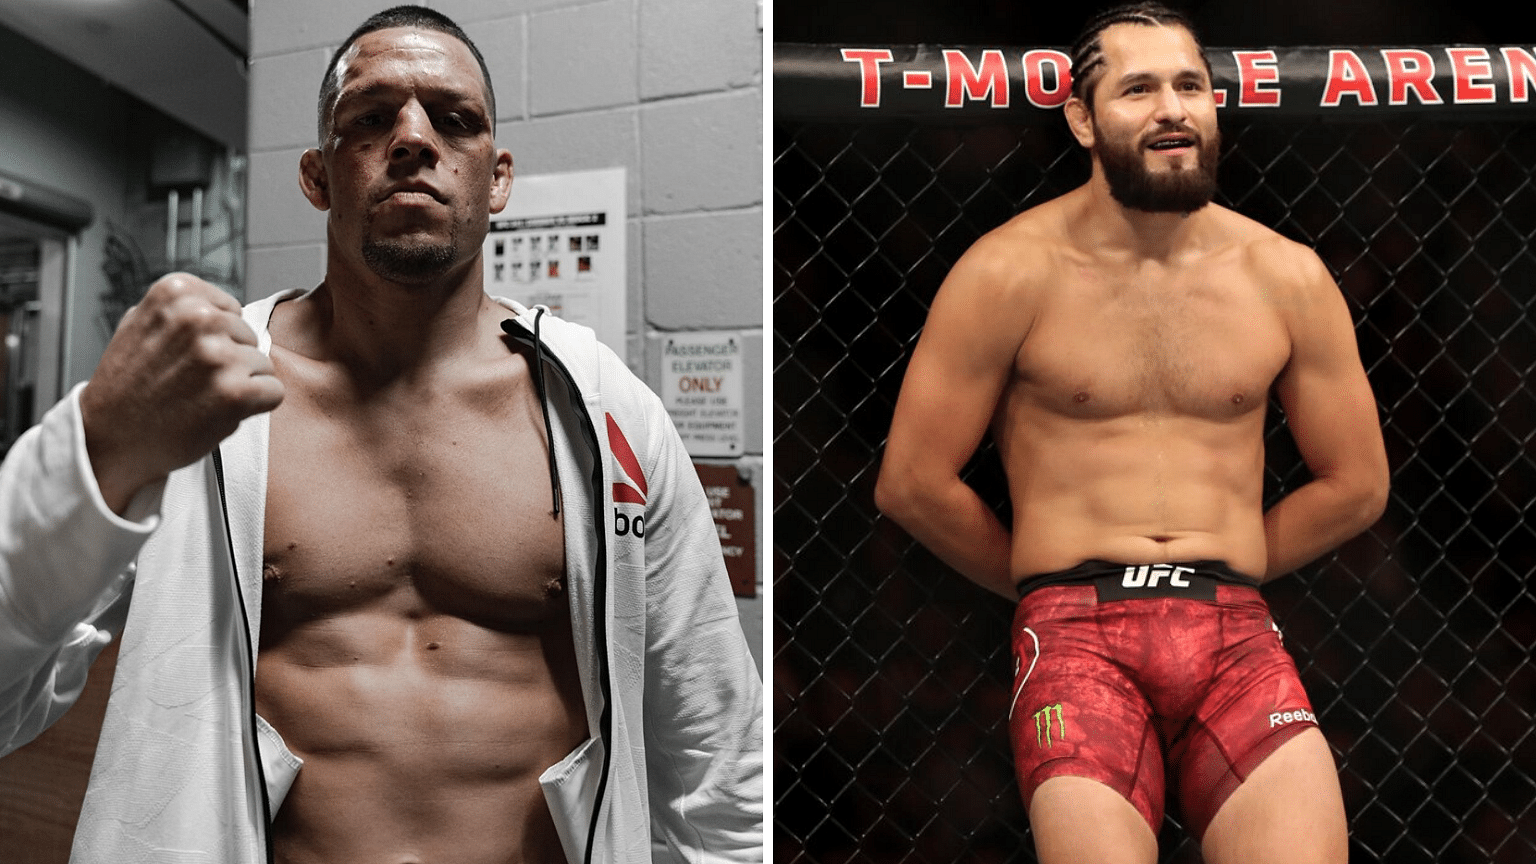 Nate Diaz and Jorge Masvidal are scheduled to headline UFC 244 from Madison Square Garden  for the BMF Title.